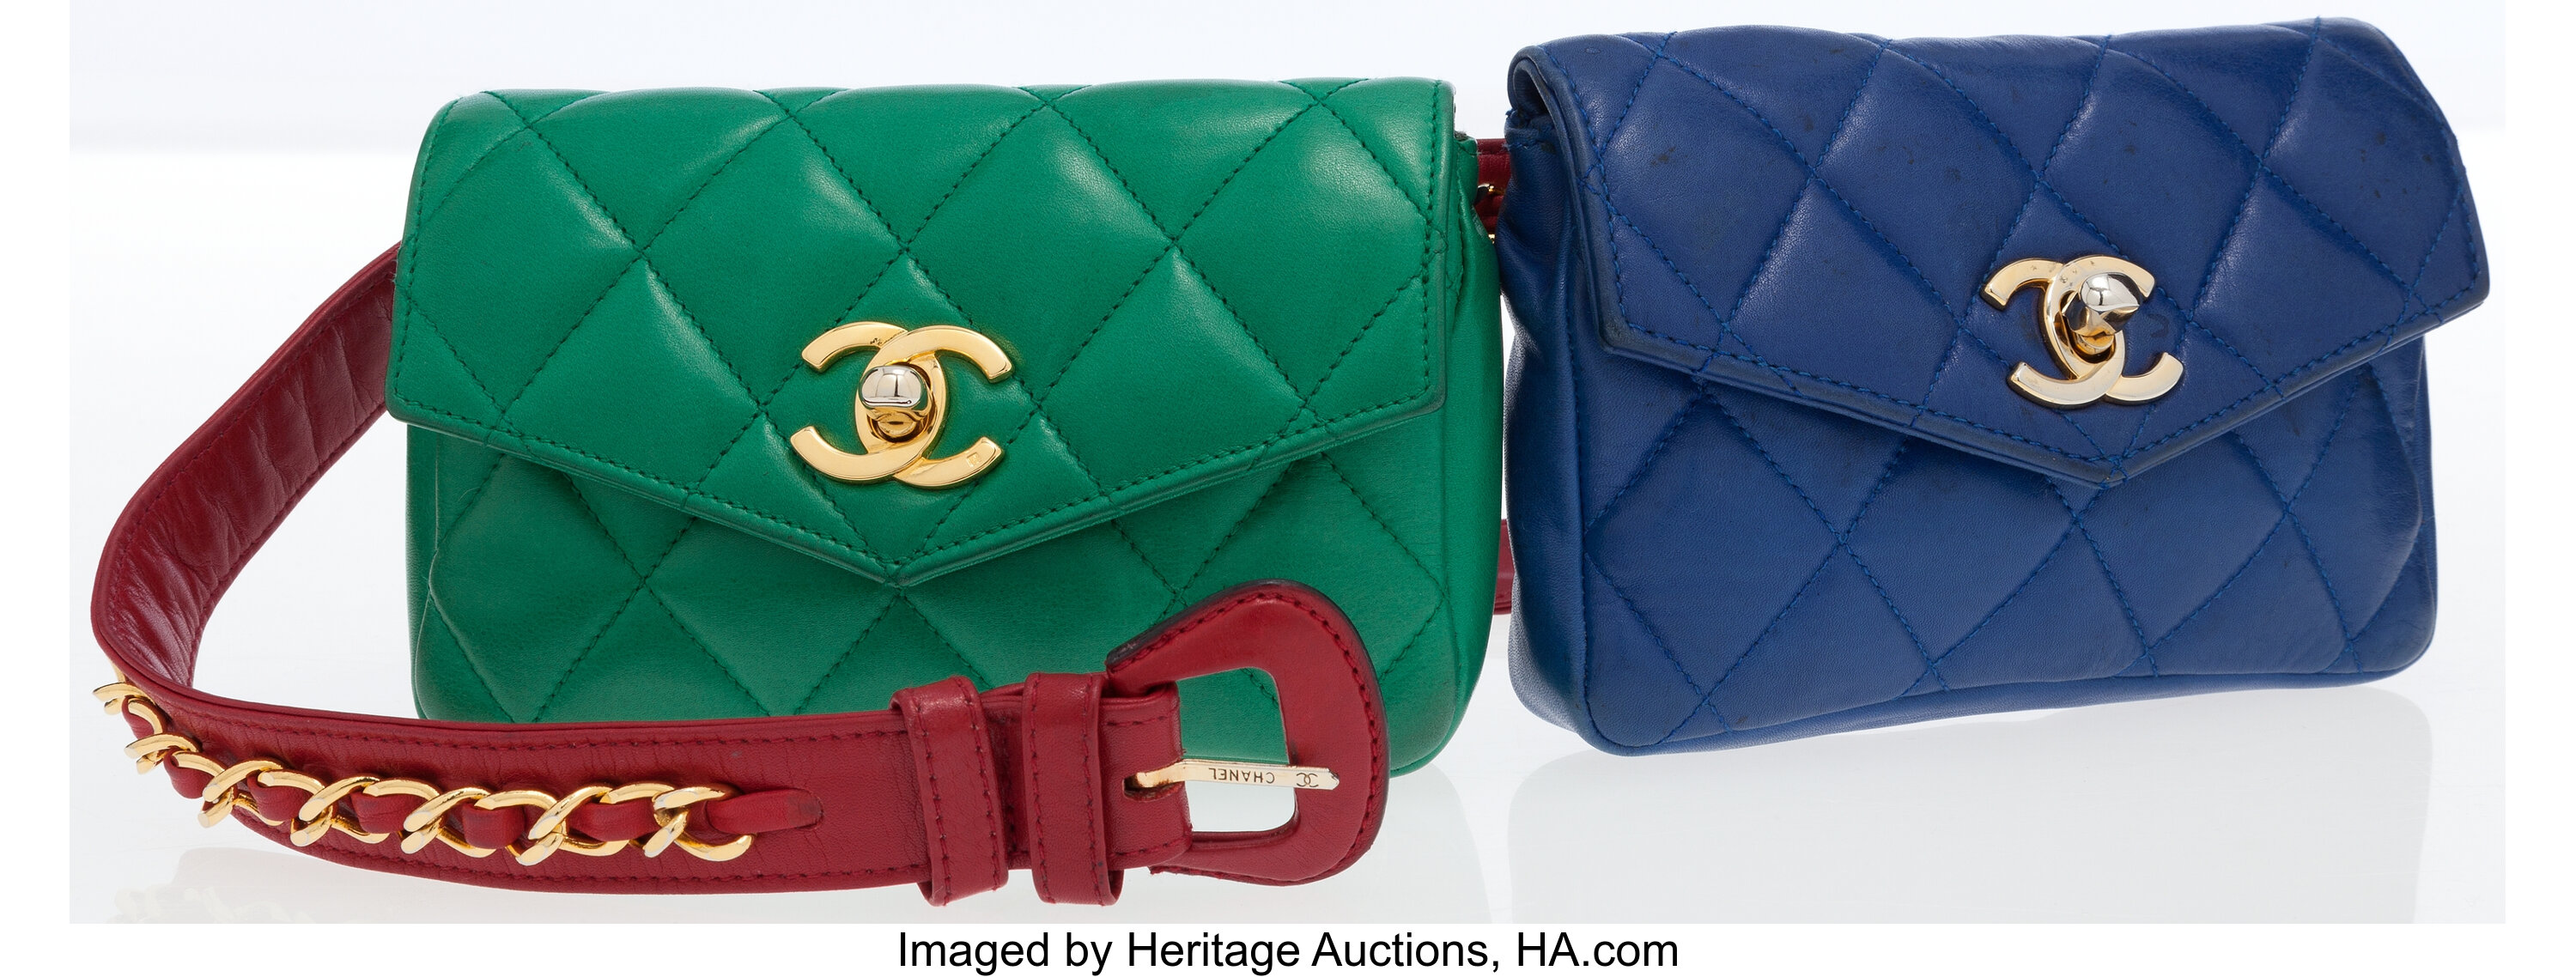 Chanel Green, Red & Blue Lambskin Leather Flap Bag Belt with Gold, Lot  #76009